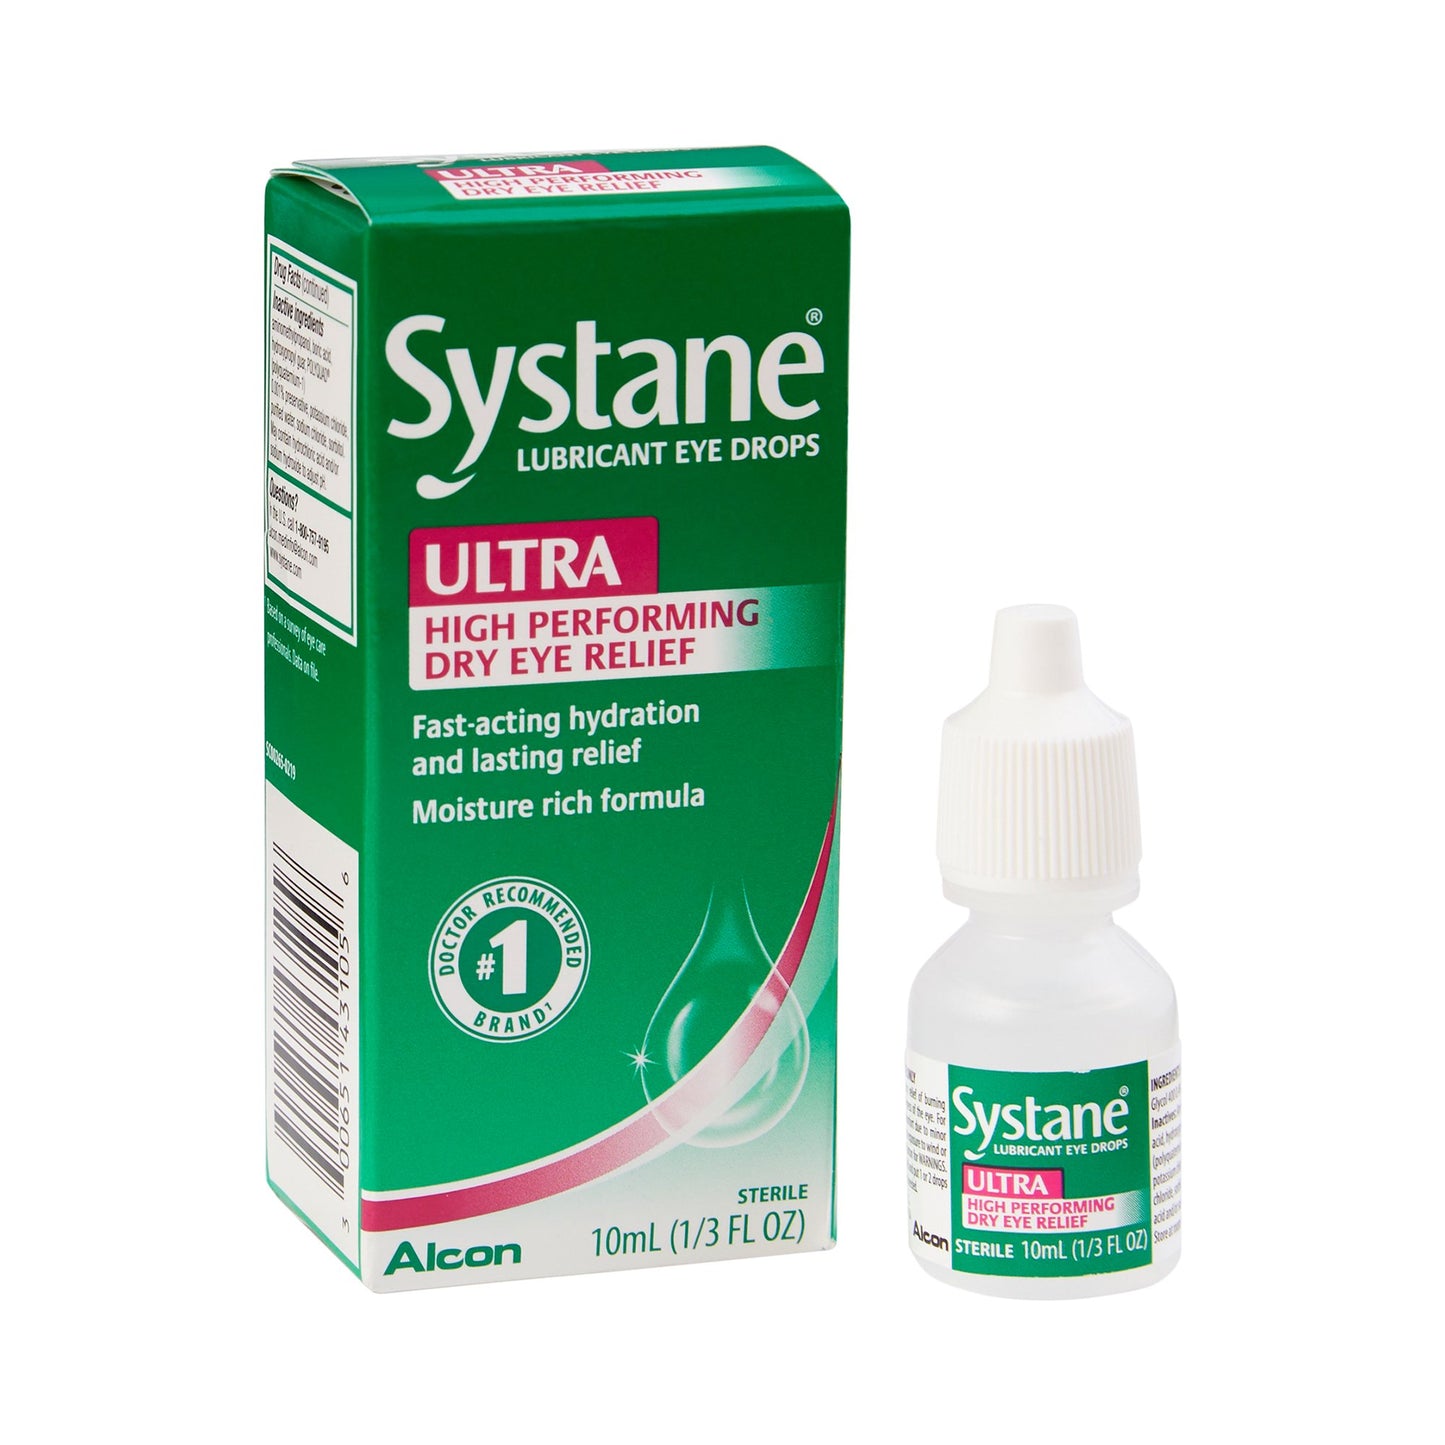 Systane® Ultra High Performing Dry Eye Relief, Lubricant Eye Drops, 10 mL